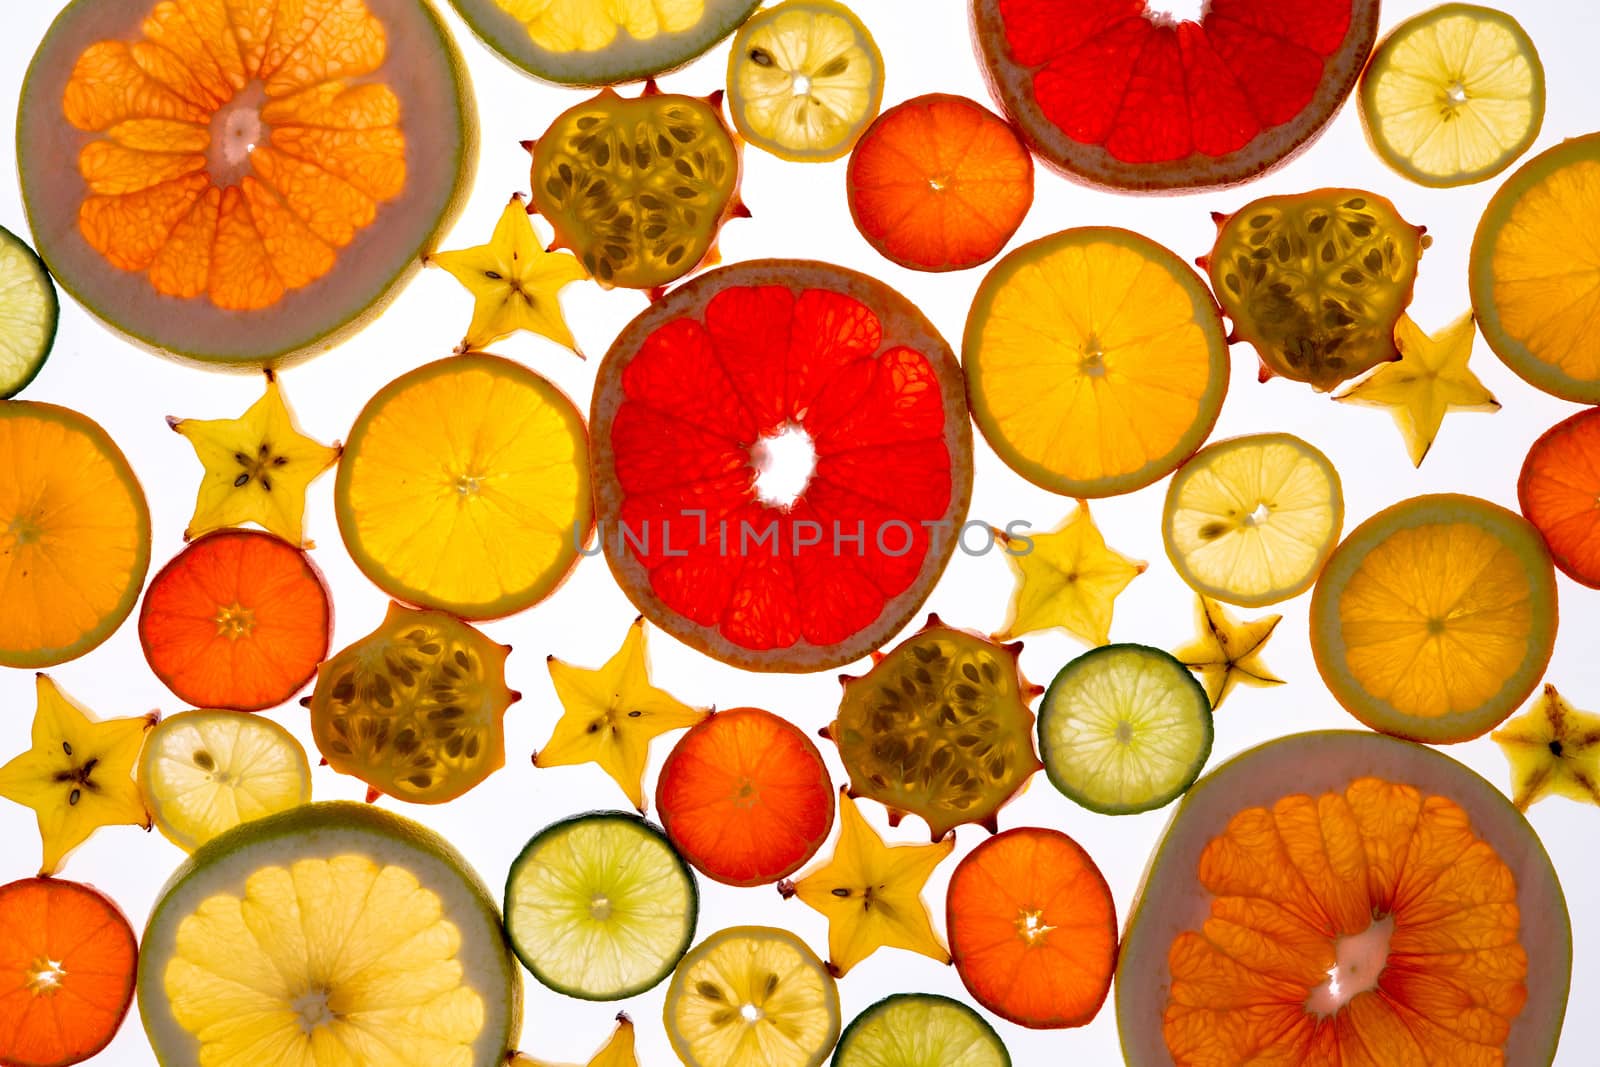 Vibrant background of translucent sliced fresh fruit neatly arranged on a white background with a variety of citrus, carambola or star fruit and kiwano or horned melon